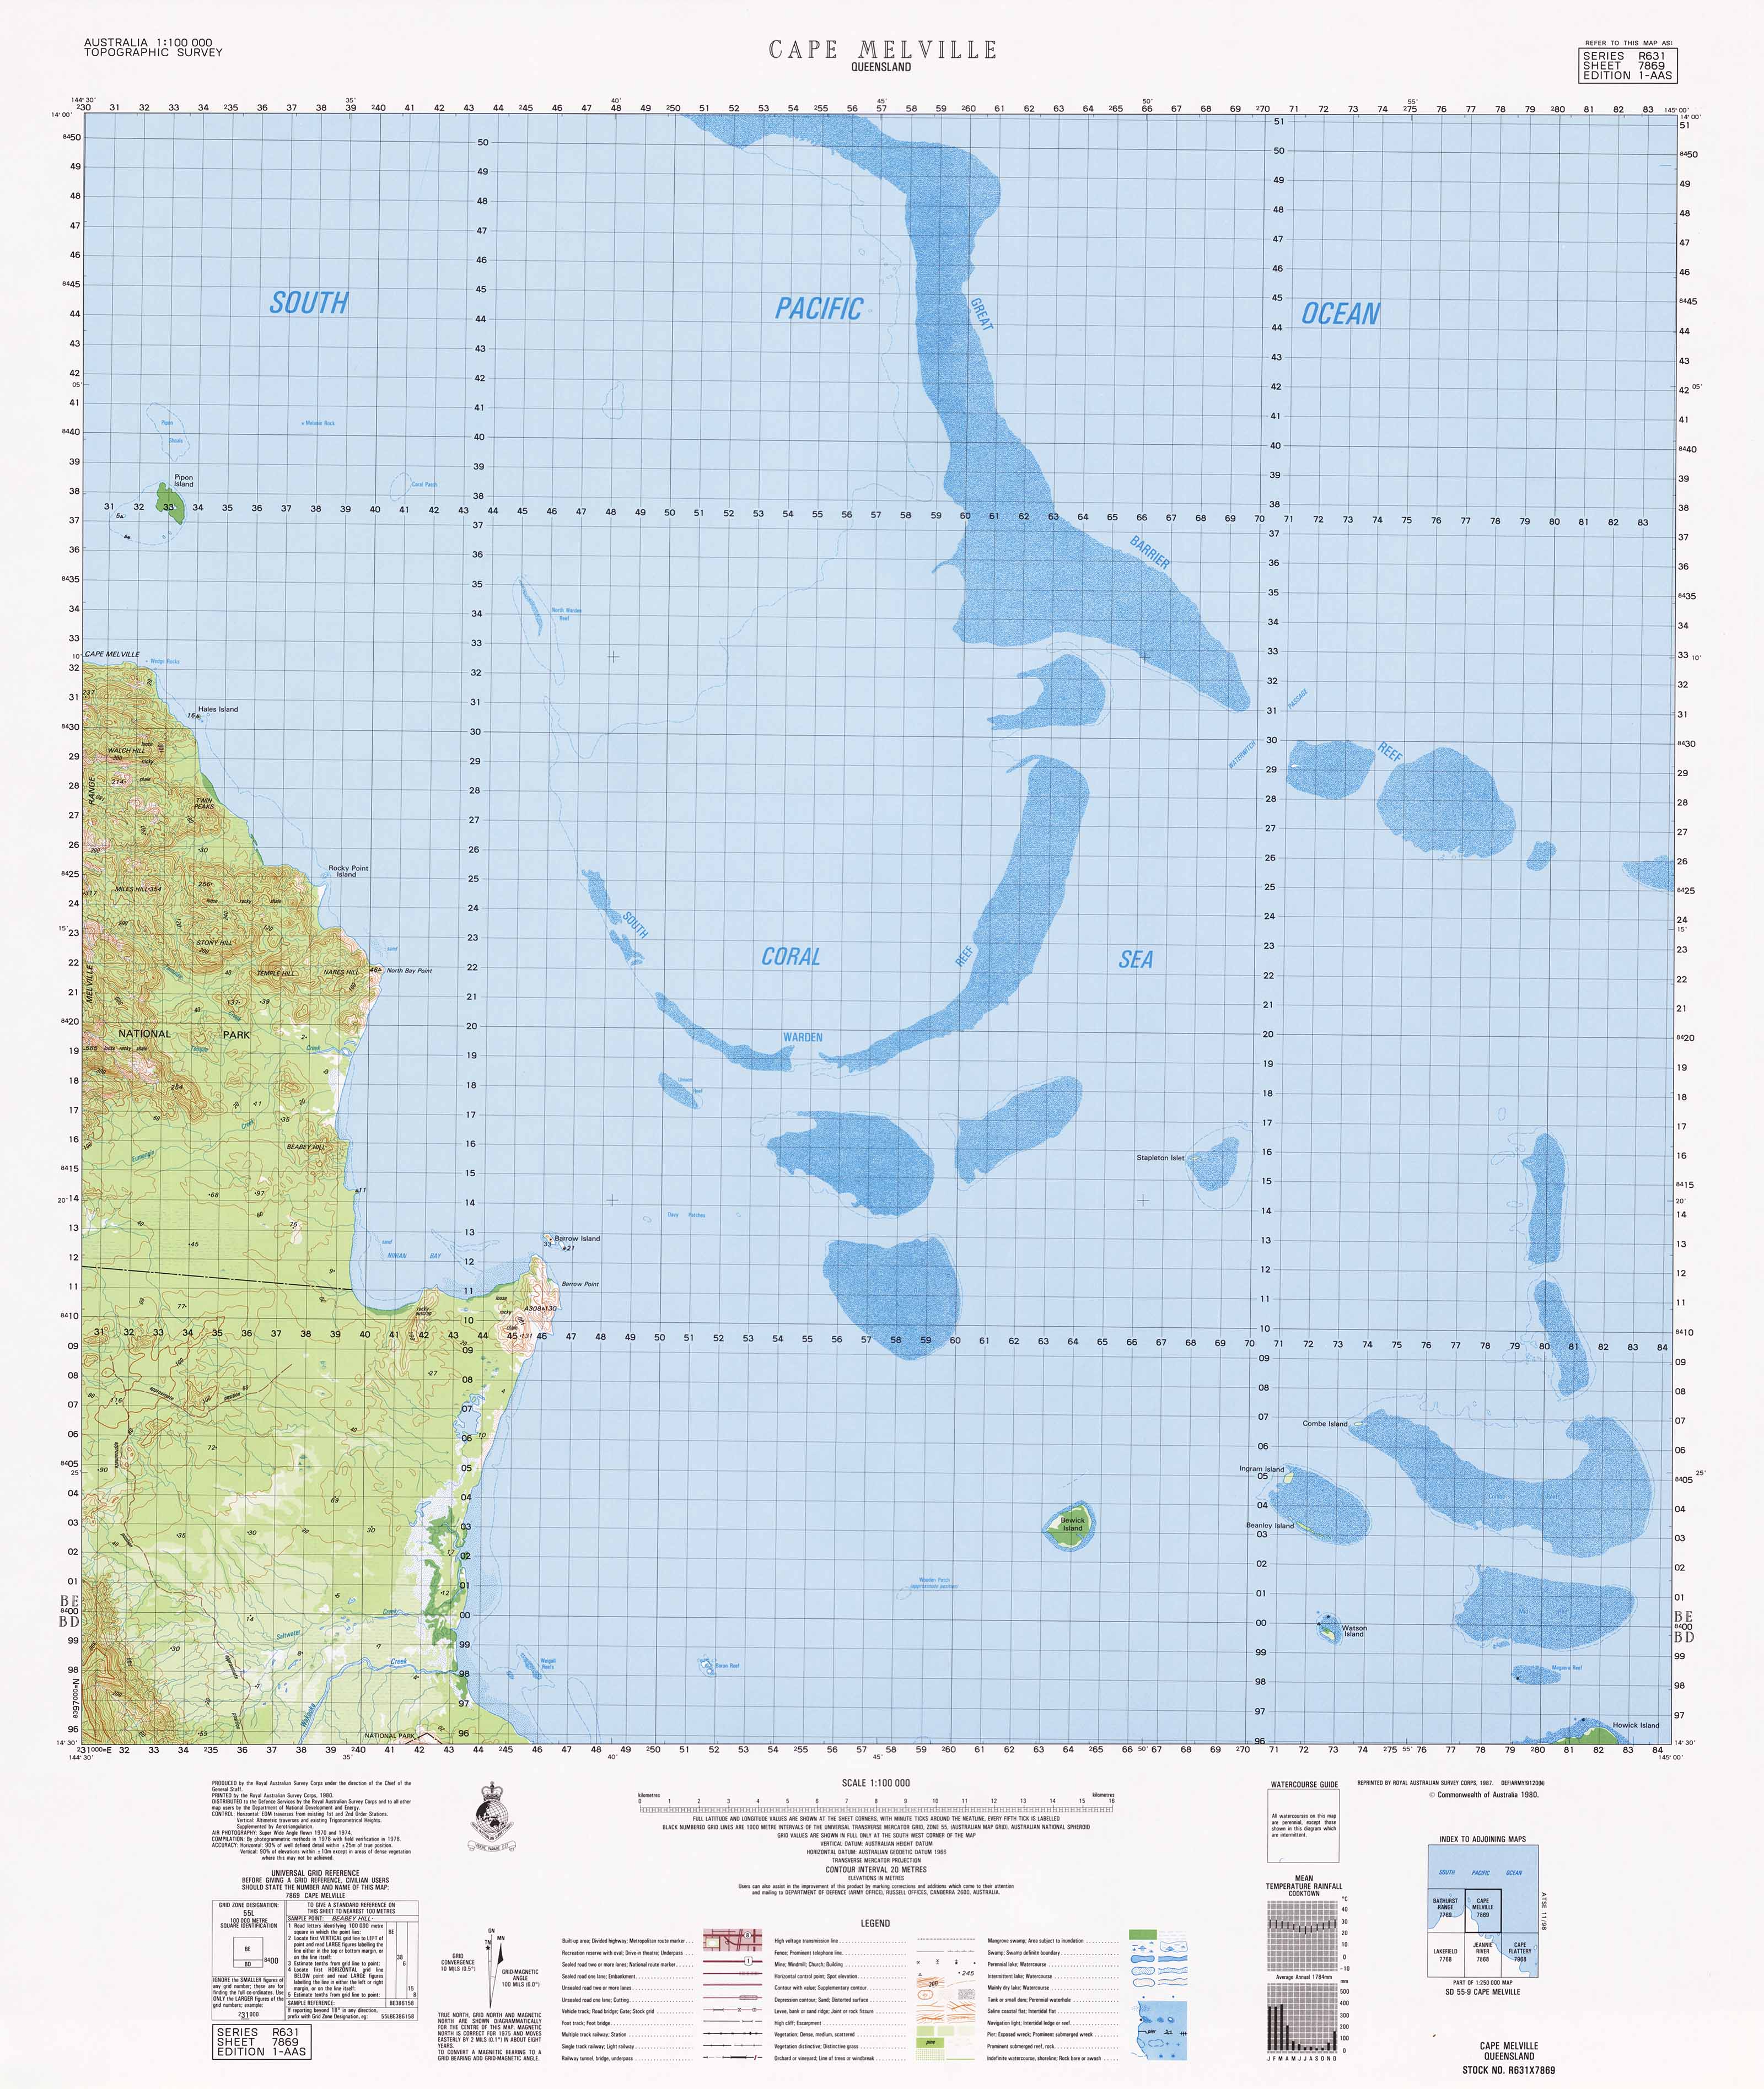 Buy 7869 Cape Melville 1:100k Topographic Map